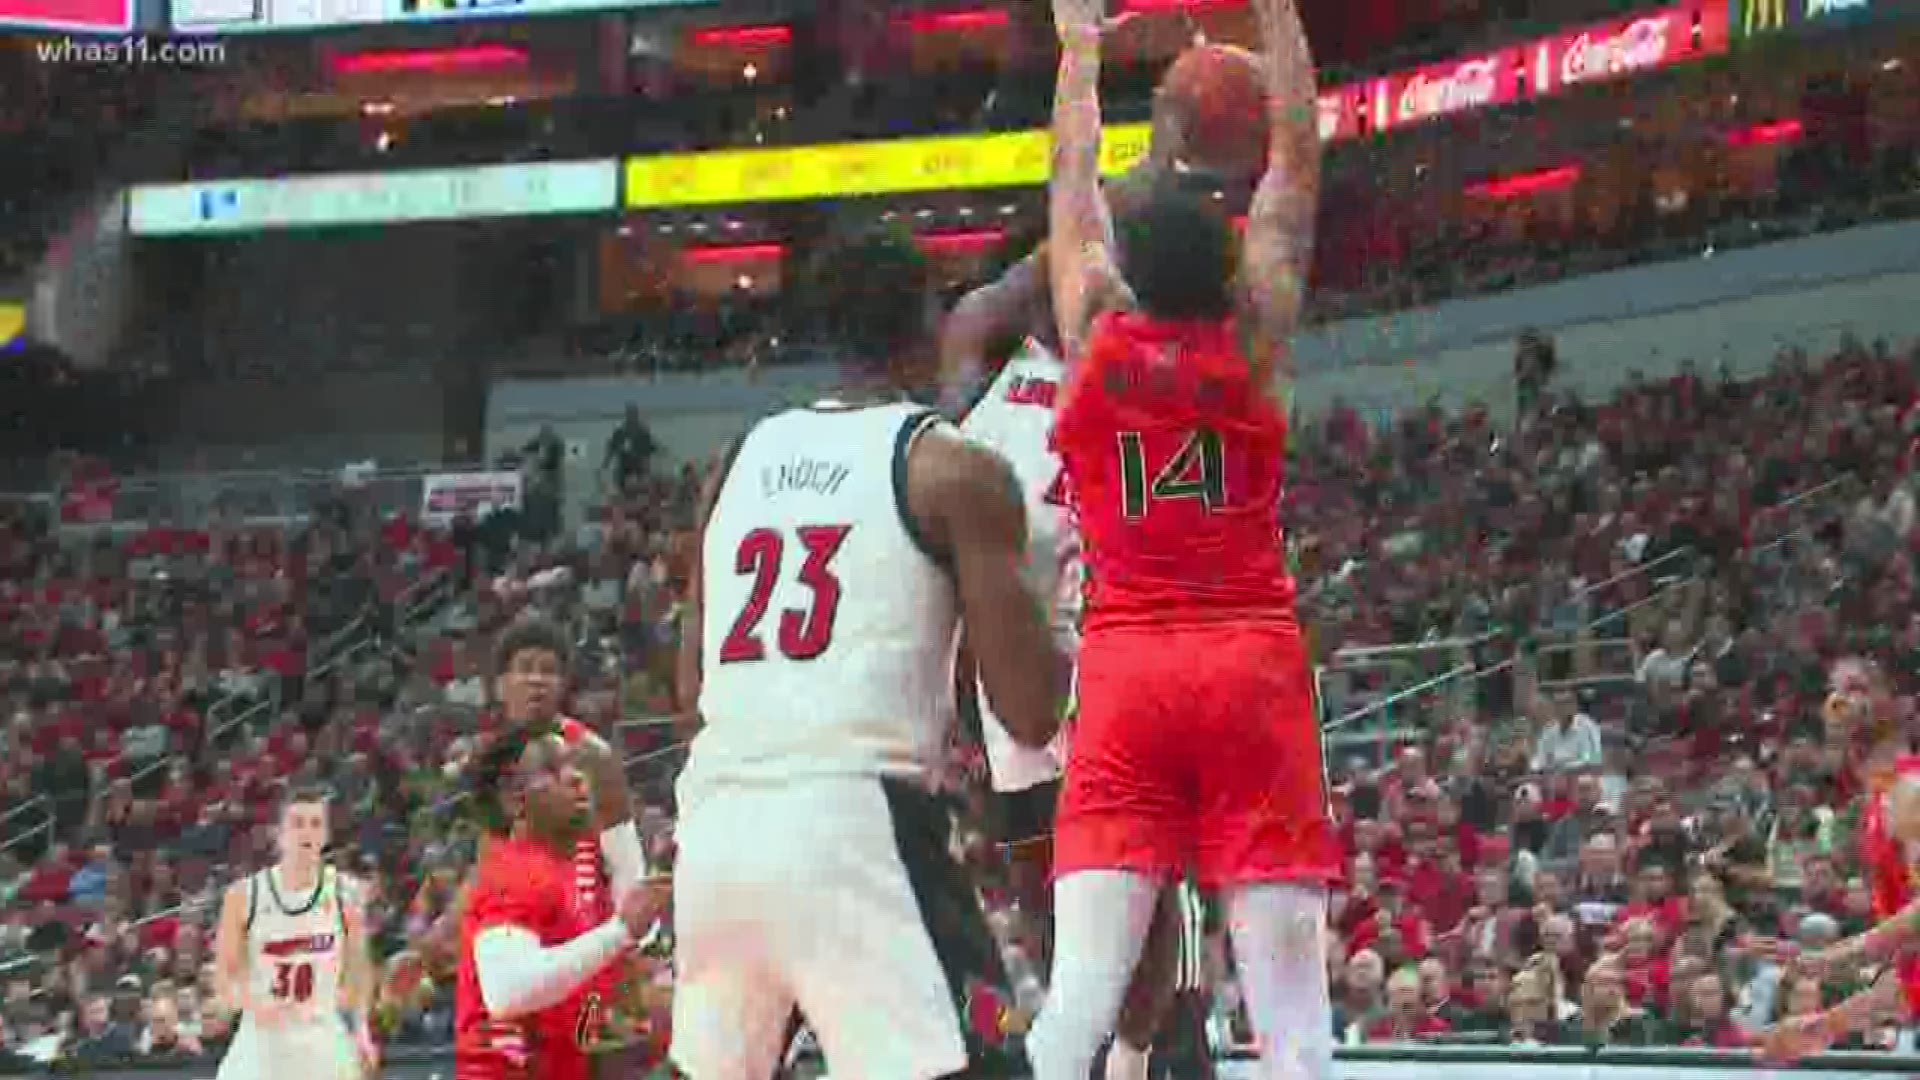 The Louisville Cardinals defeated Miami at home 74-58.